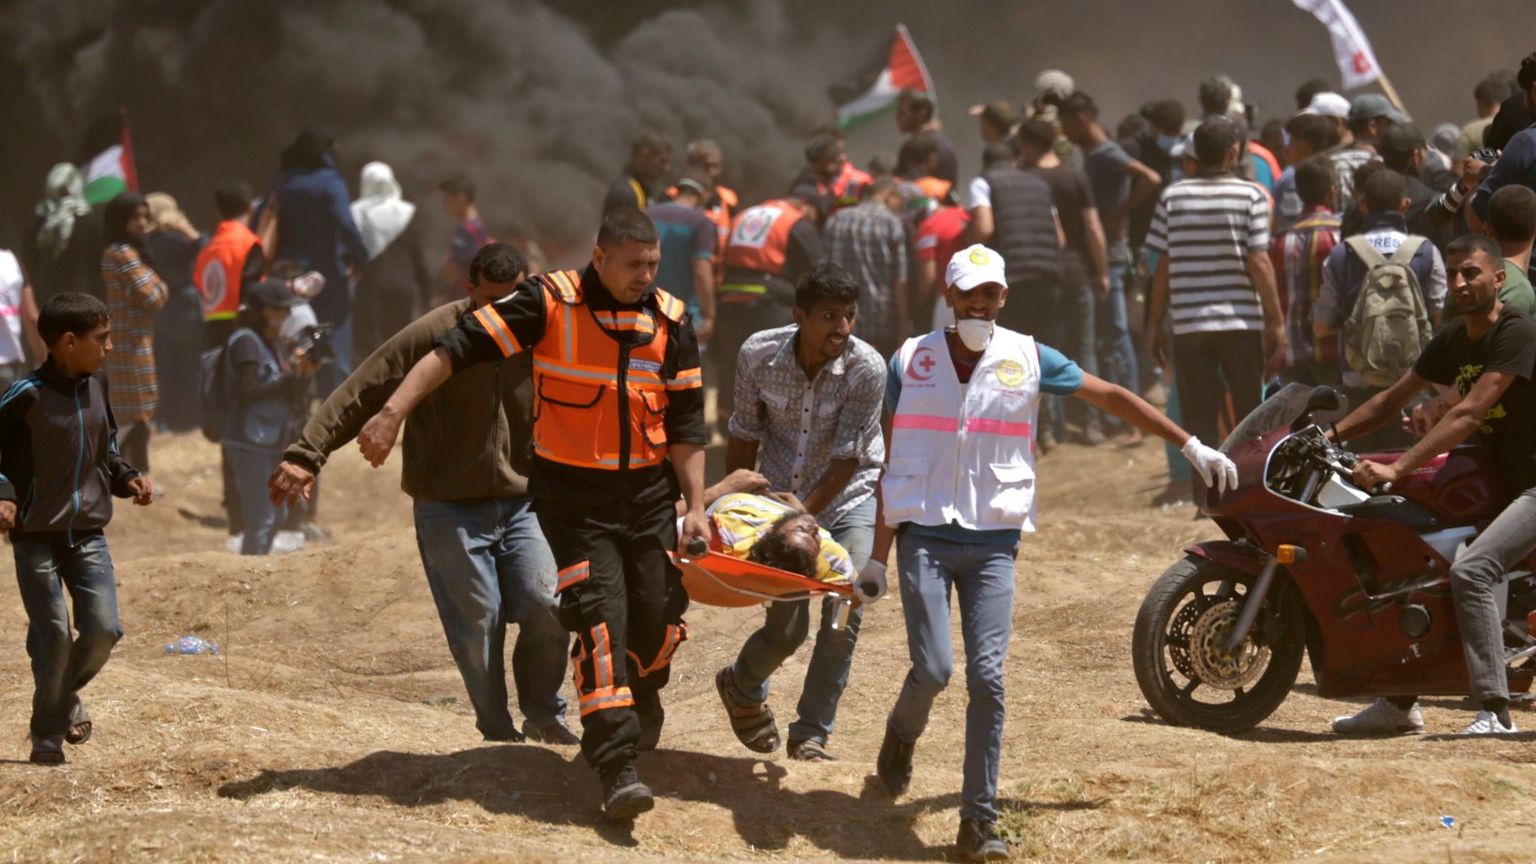 Palestinians carry a person wounded during a protest on the Israel-Gaza border (14 May 2018)